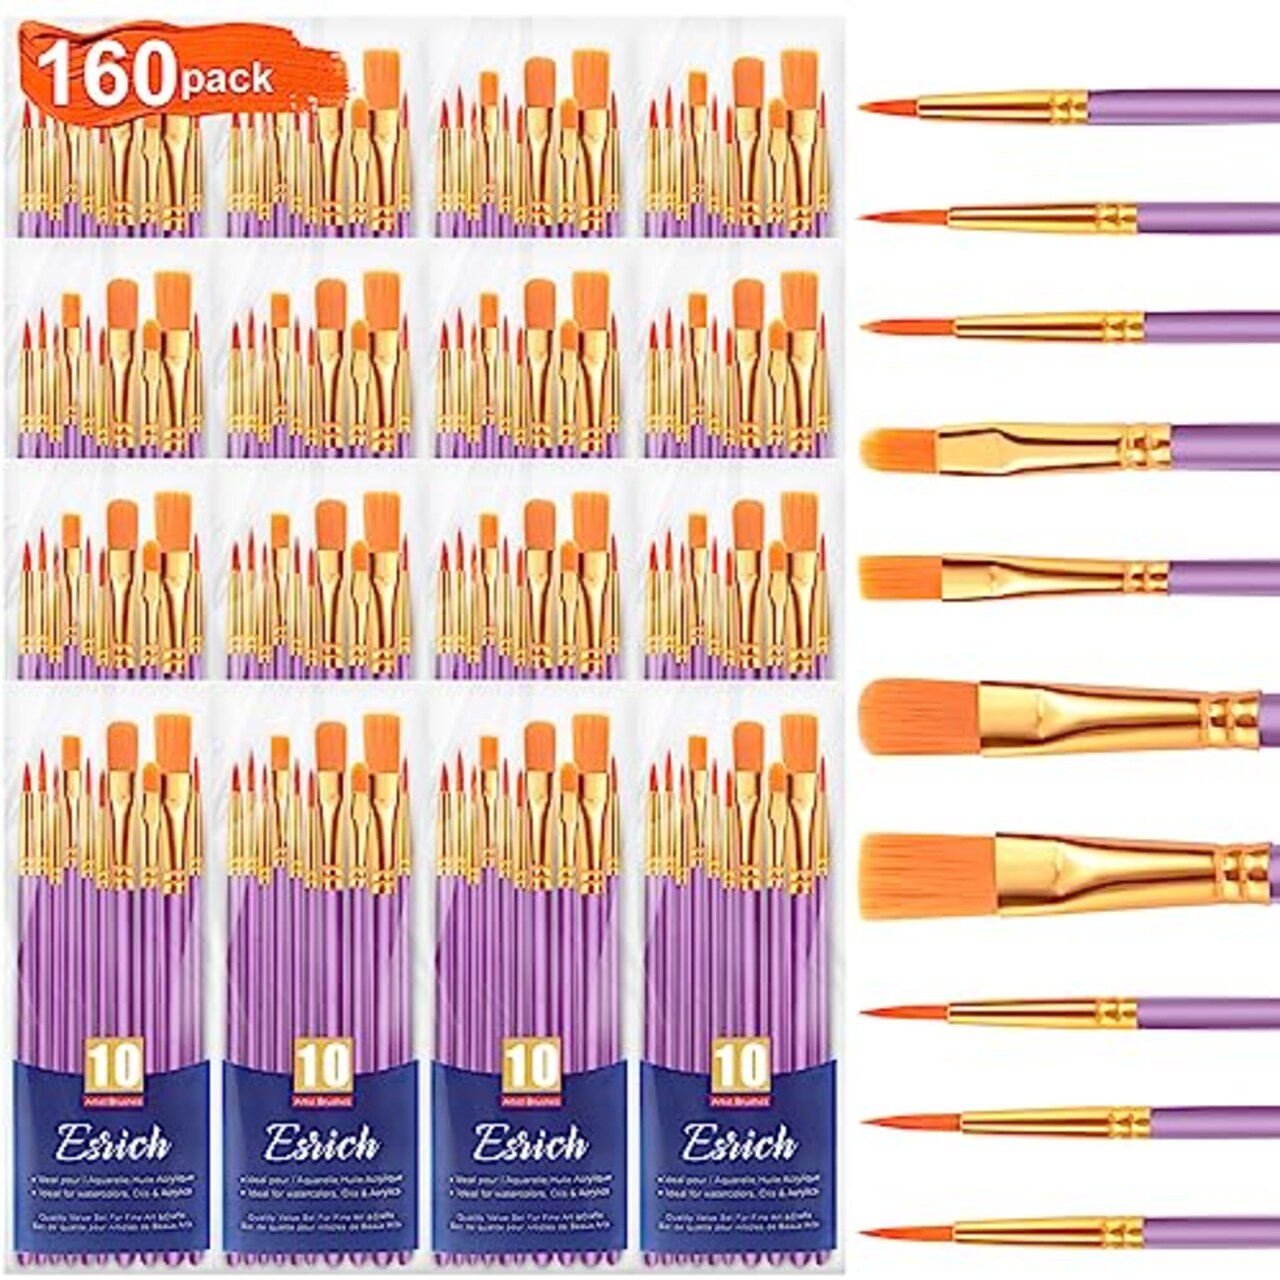 ESRICH Acrylic Paint Brushes Set, 16Packs/160 Pcs, Suitable for Acrylic,  Oil, Watercolor,Rock Body Face Nail Art,Perfect Suit of Art Painting, Best  Gift for Kids Adult Drawing, Purple